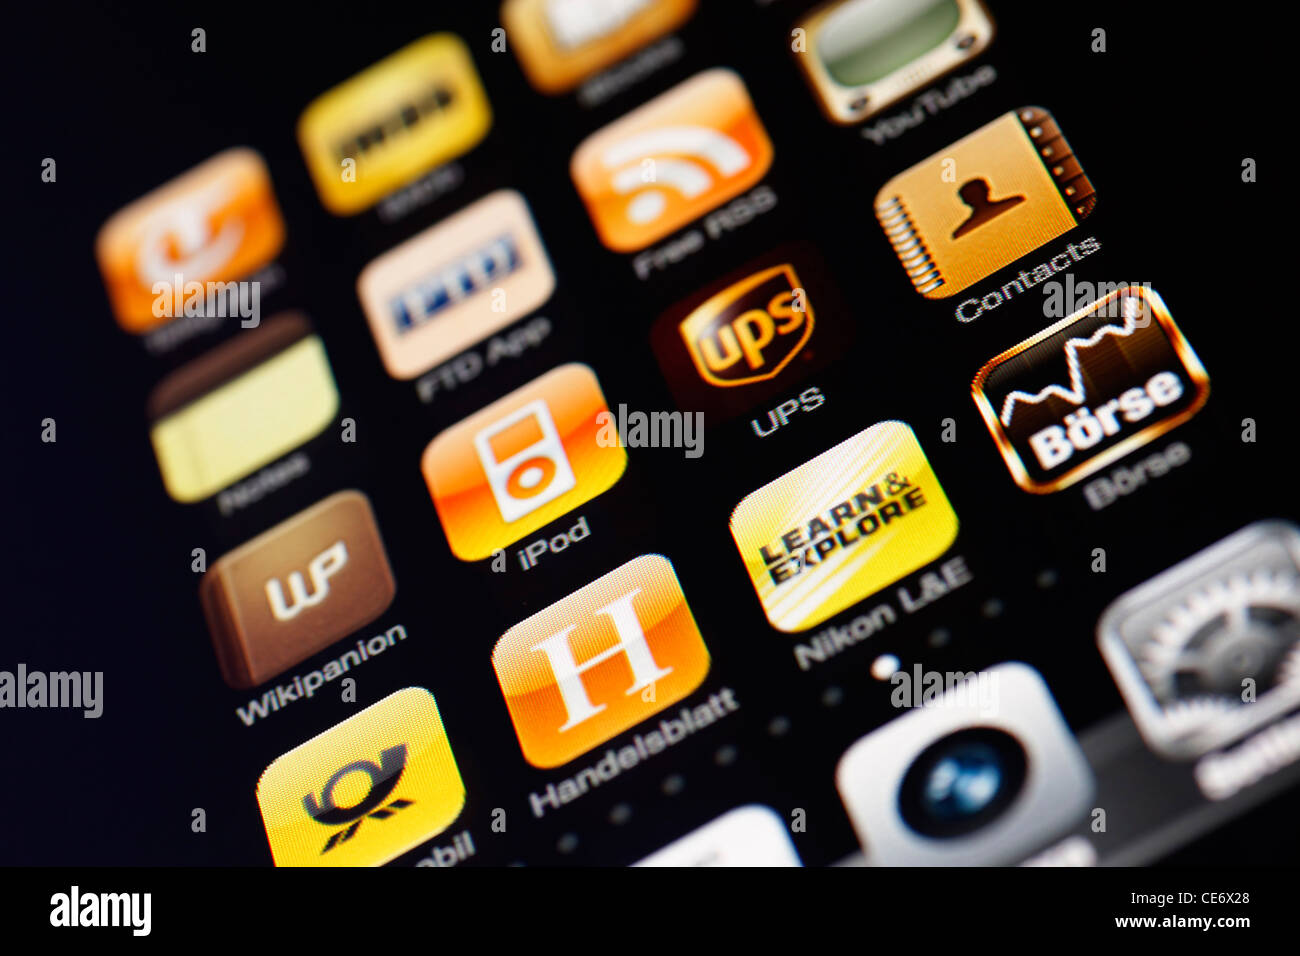 Muenster, Germany, January 26, 2012: Image of the iphone touch screen. Display shows a collection of useful apps with yellow col Stock Photo